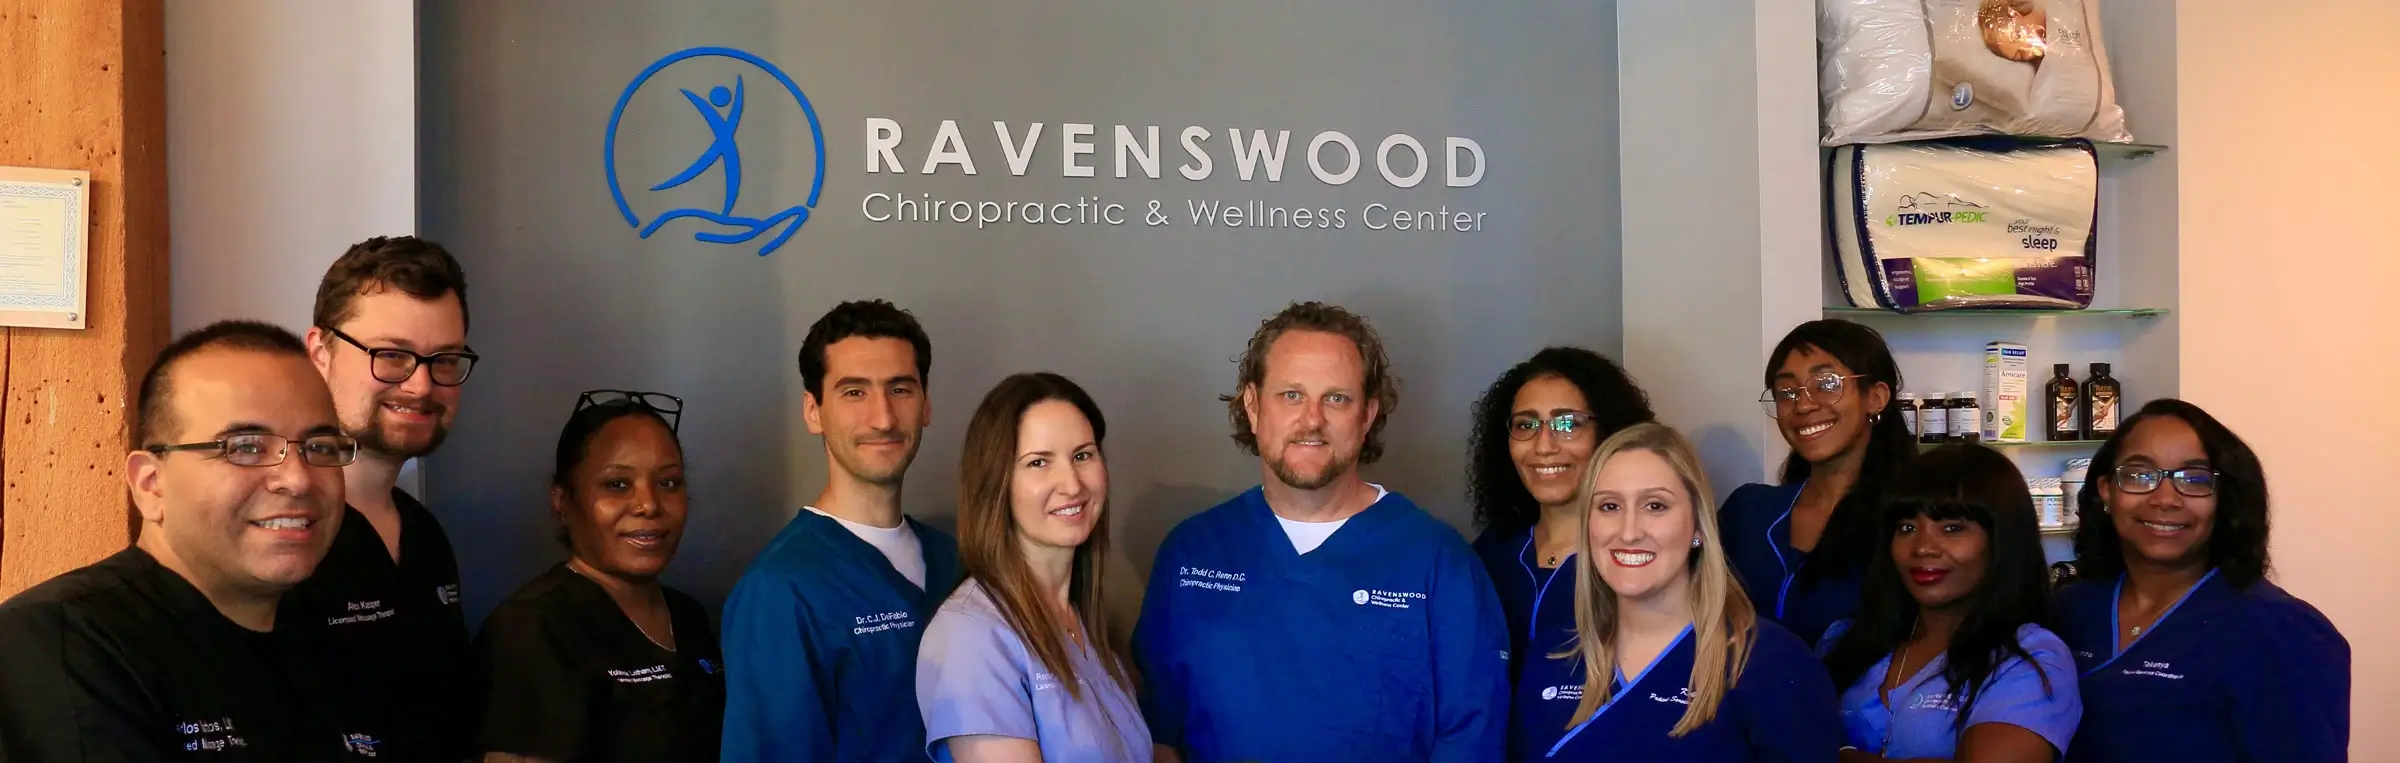 Welcome to Ravenswood Chiropractic of Chicago